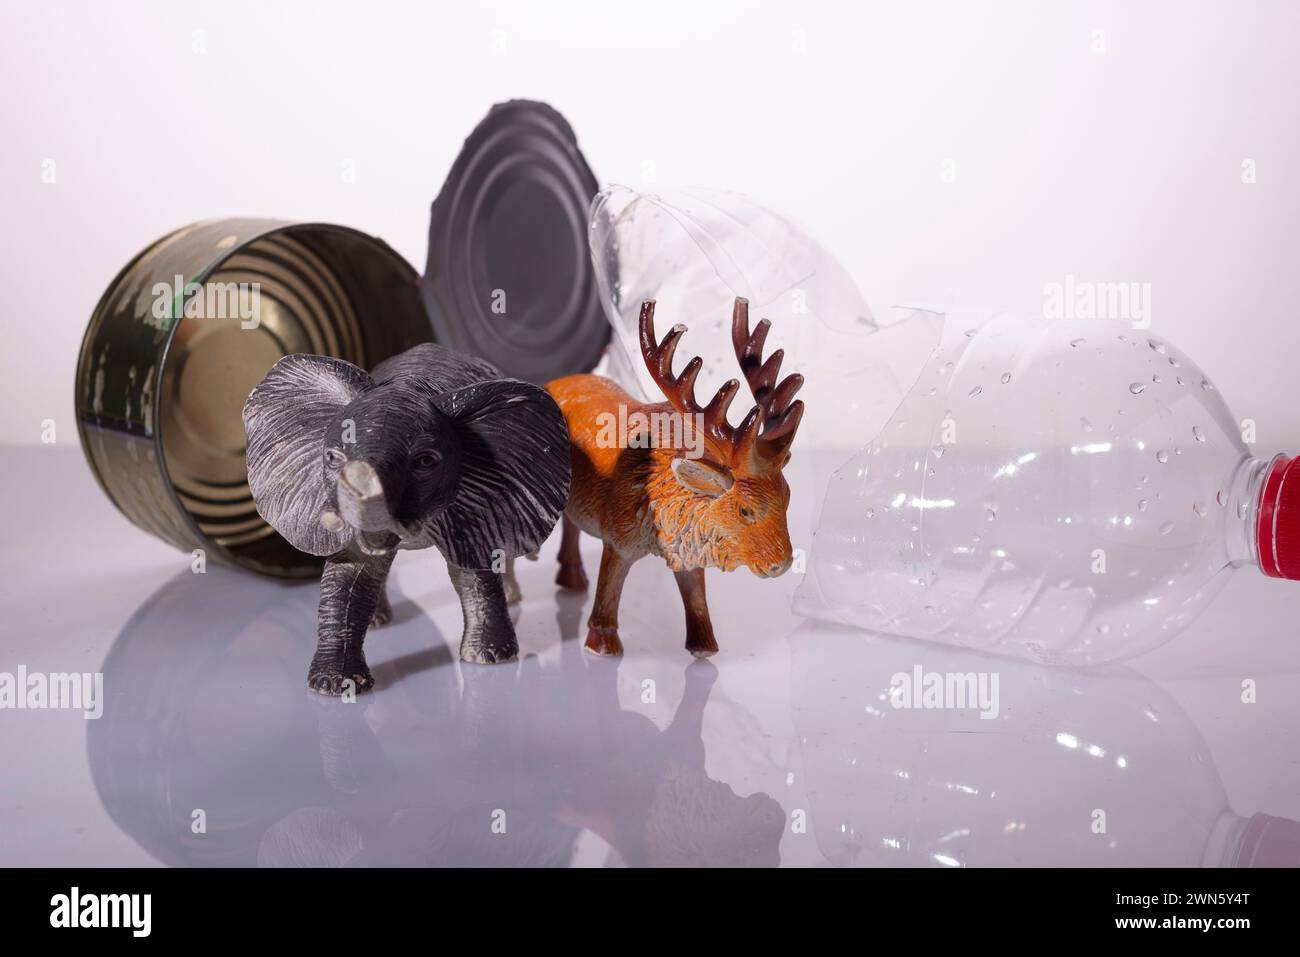 plastic pollution concept harm to animals. Animal toys with plastic, metal and glass on a white background installation Stock Photo